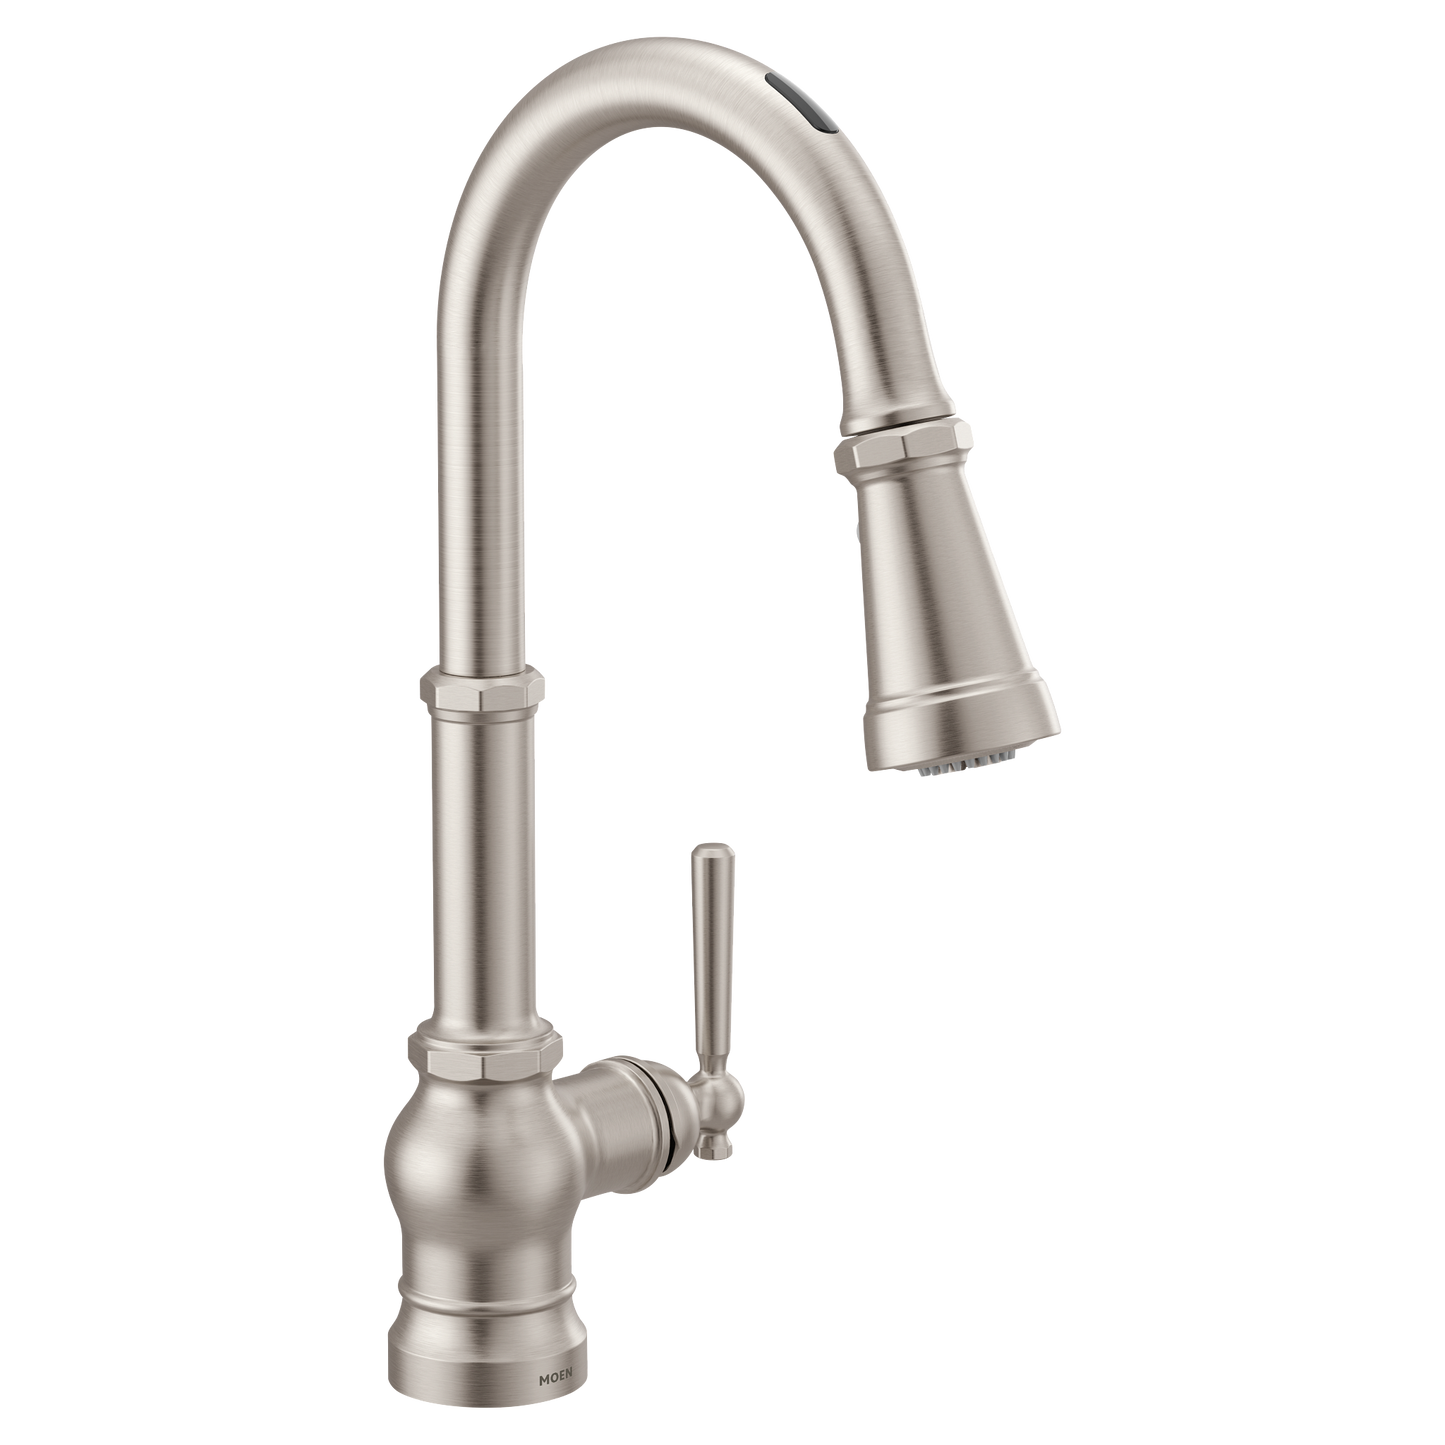 Paterson Motion Control Smart Kitchen One-Handle High Arc Pulldown Faucet